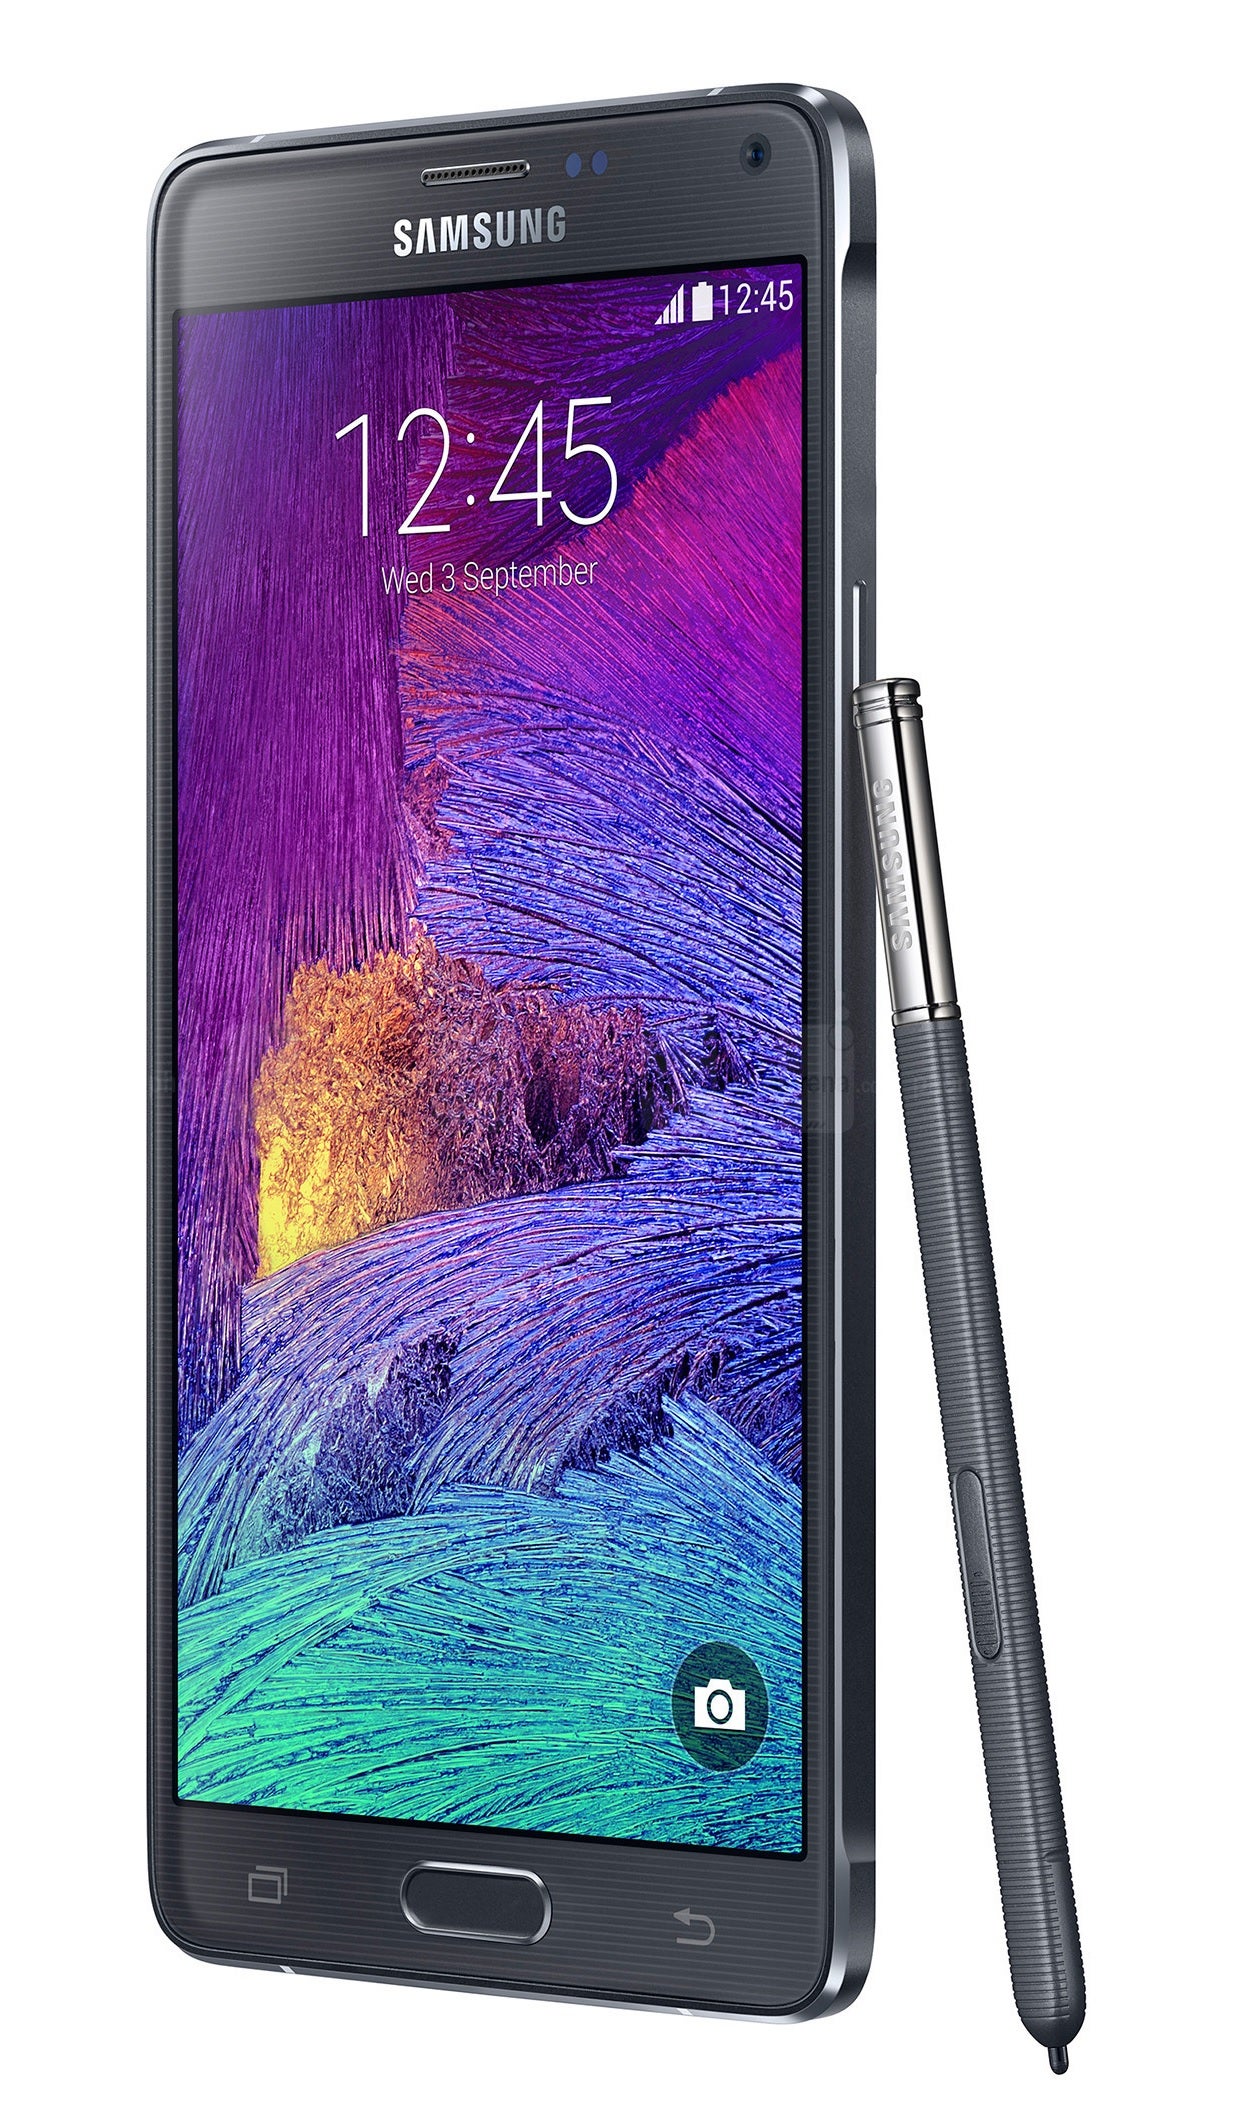 Samsung Galaxy Note 4 specs review